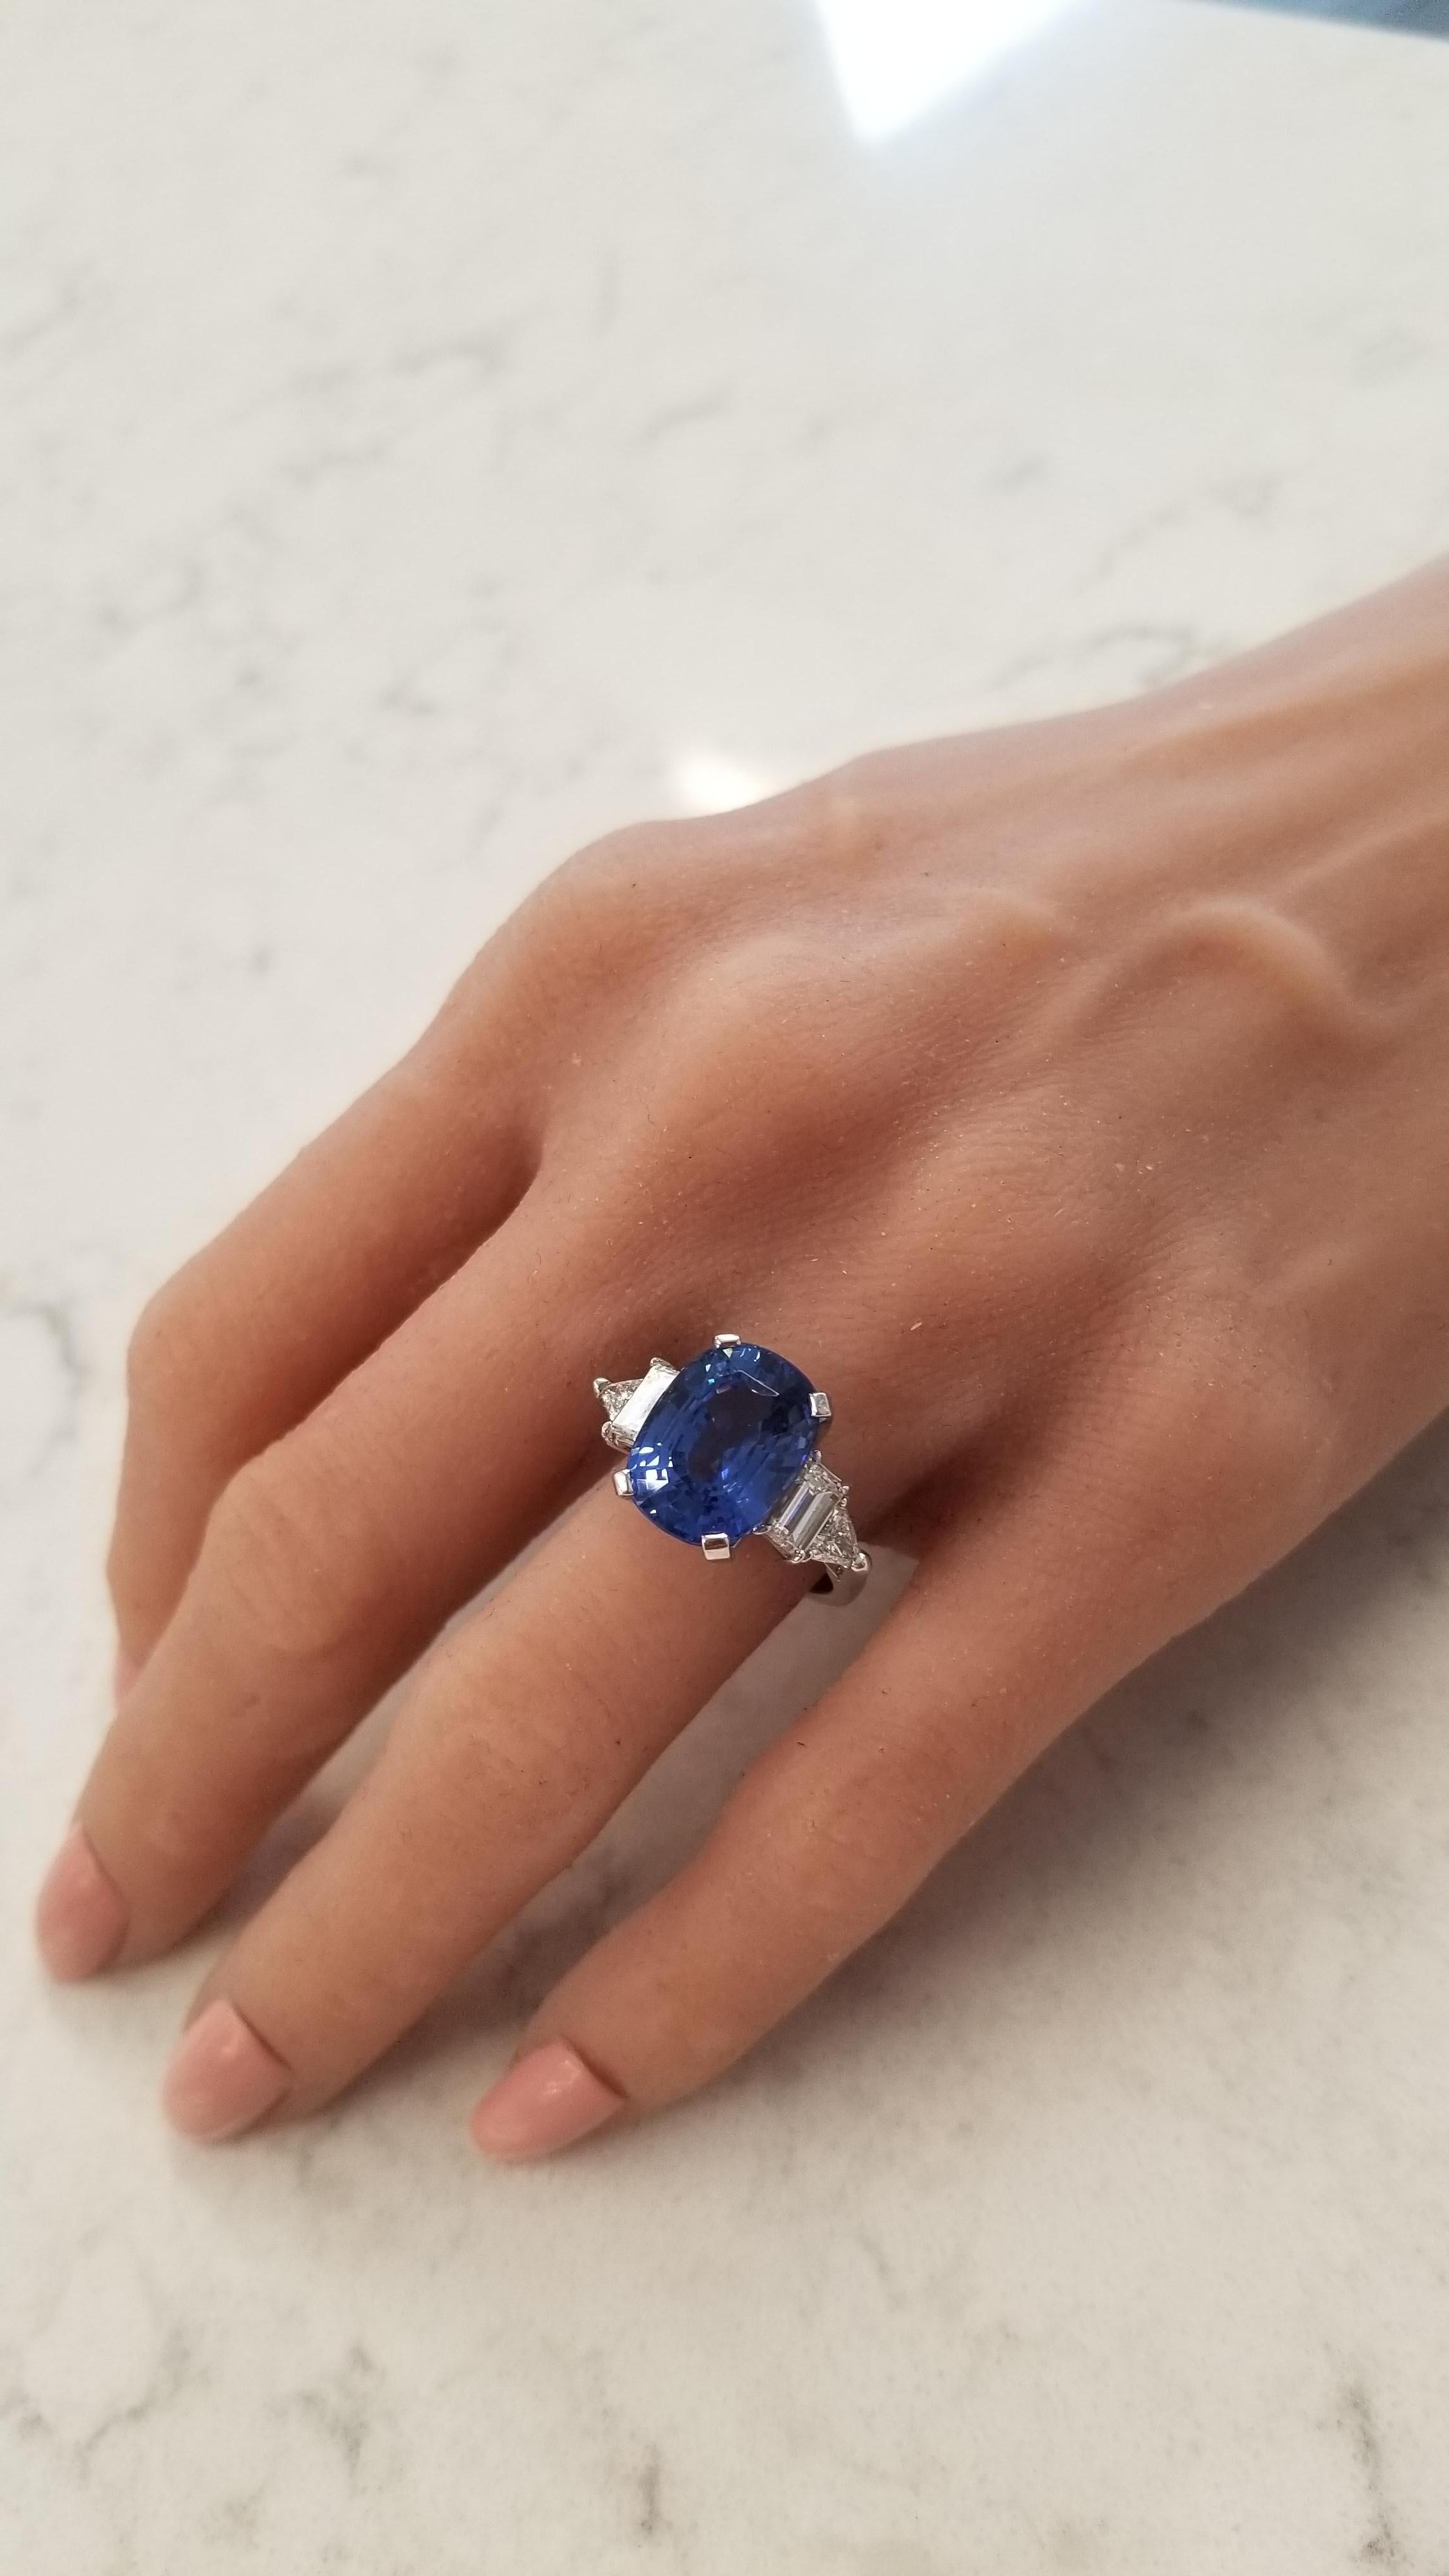 This art deco inspired ring features a GIA certified natural 10.20 carat cushion cut vibrant Ceylon royal blue sapphire prong set in the center measuring 13.70 x 10.400mm. The gem source is Sri Lanka; it's size, transparency, and luster are super.